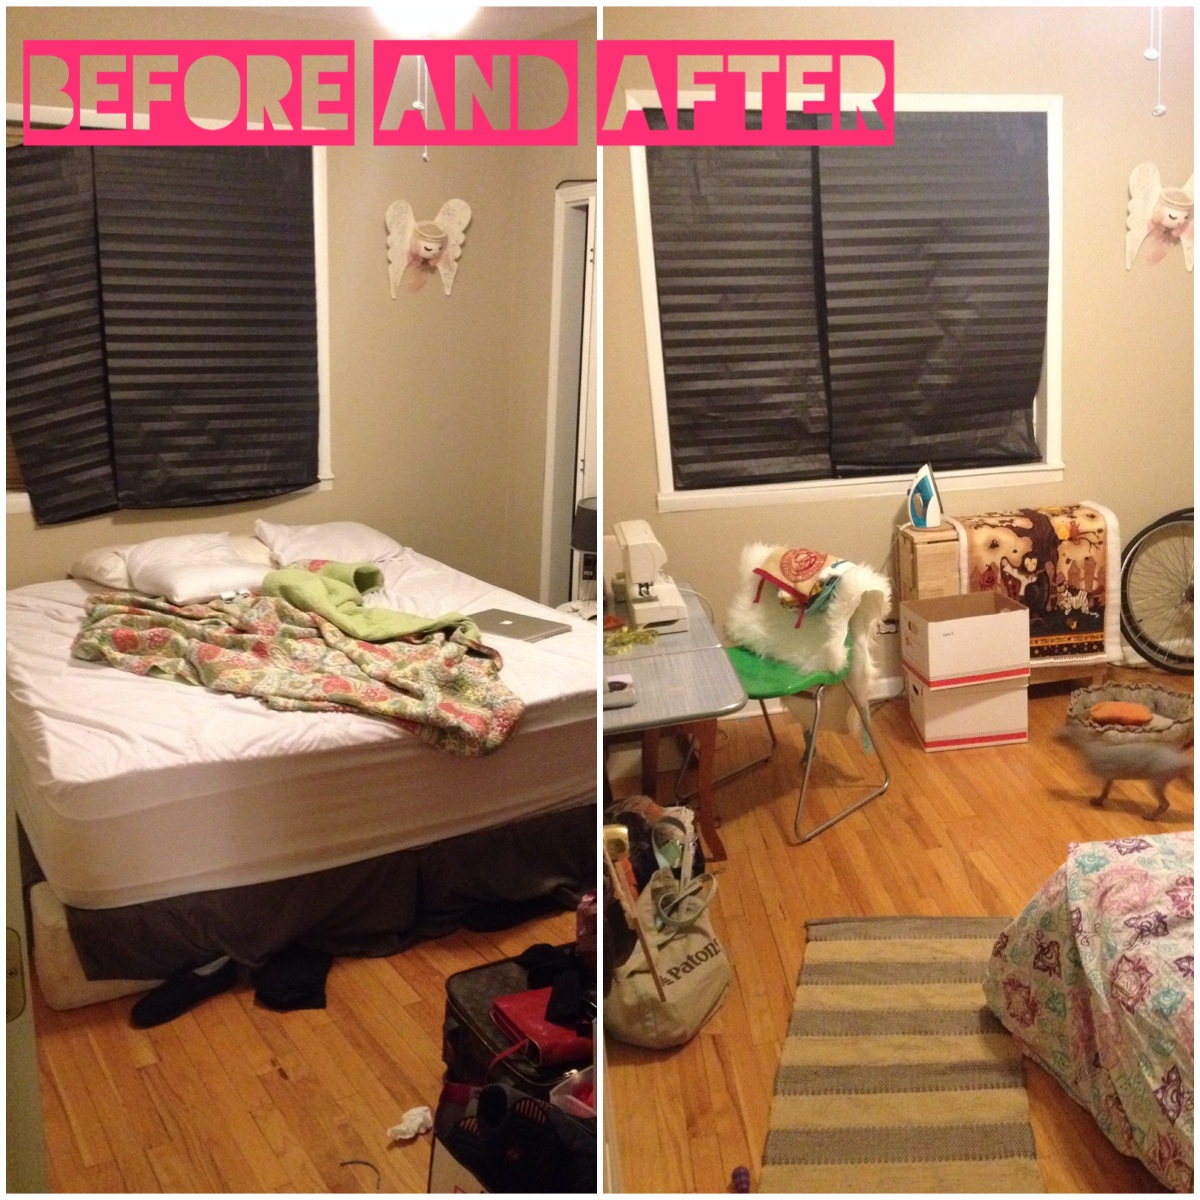 BEFORE AND AFTER iCraft Room Bedroomi MAKEOVER